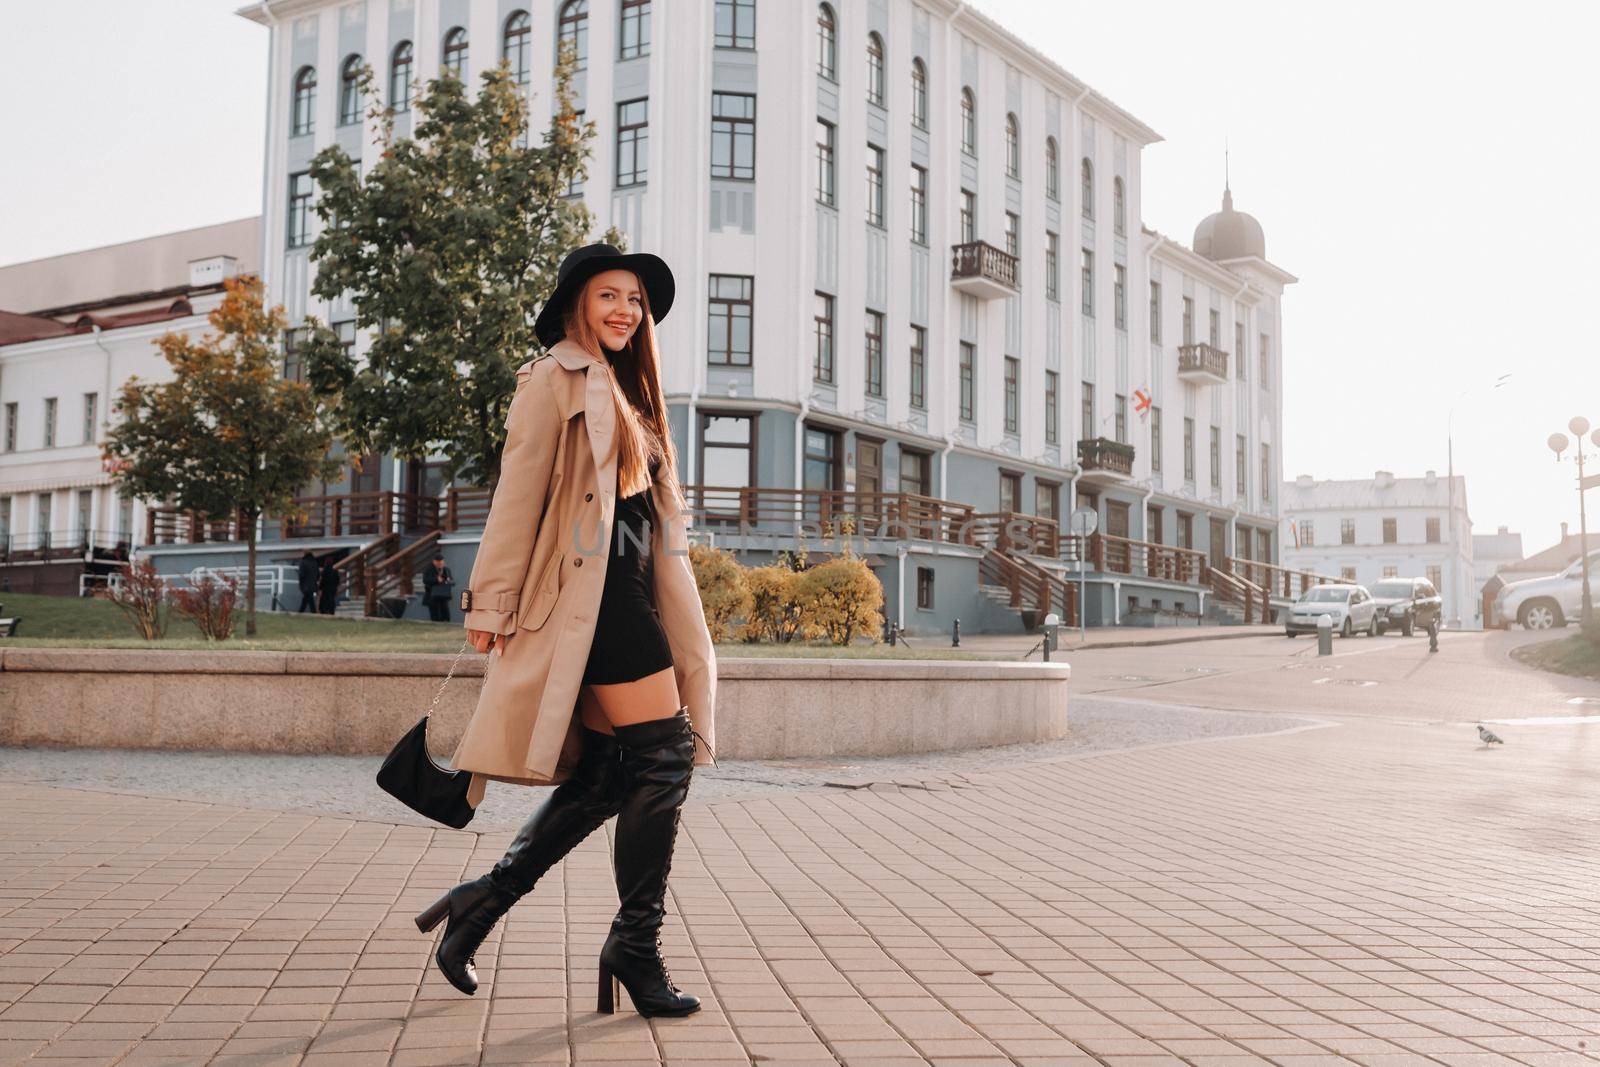 Stylish young woman in a beige coat in a black hat on a city street. Women's street fashion. Autumn clothing.Urban style by Lobachad